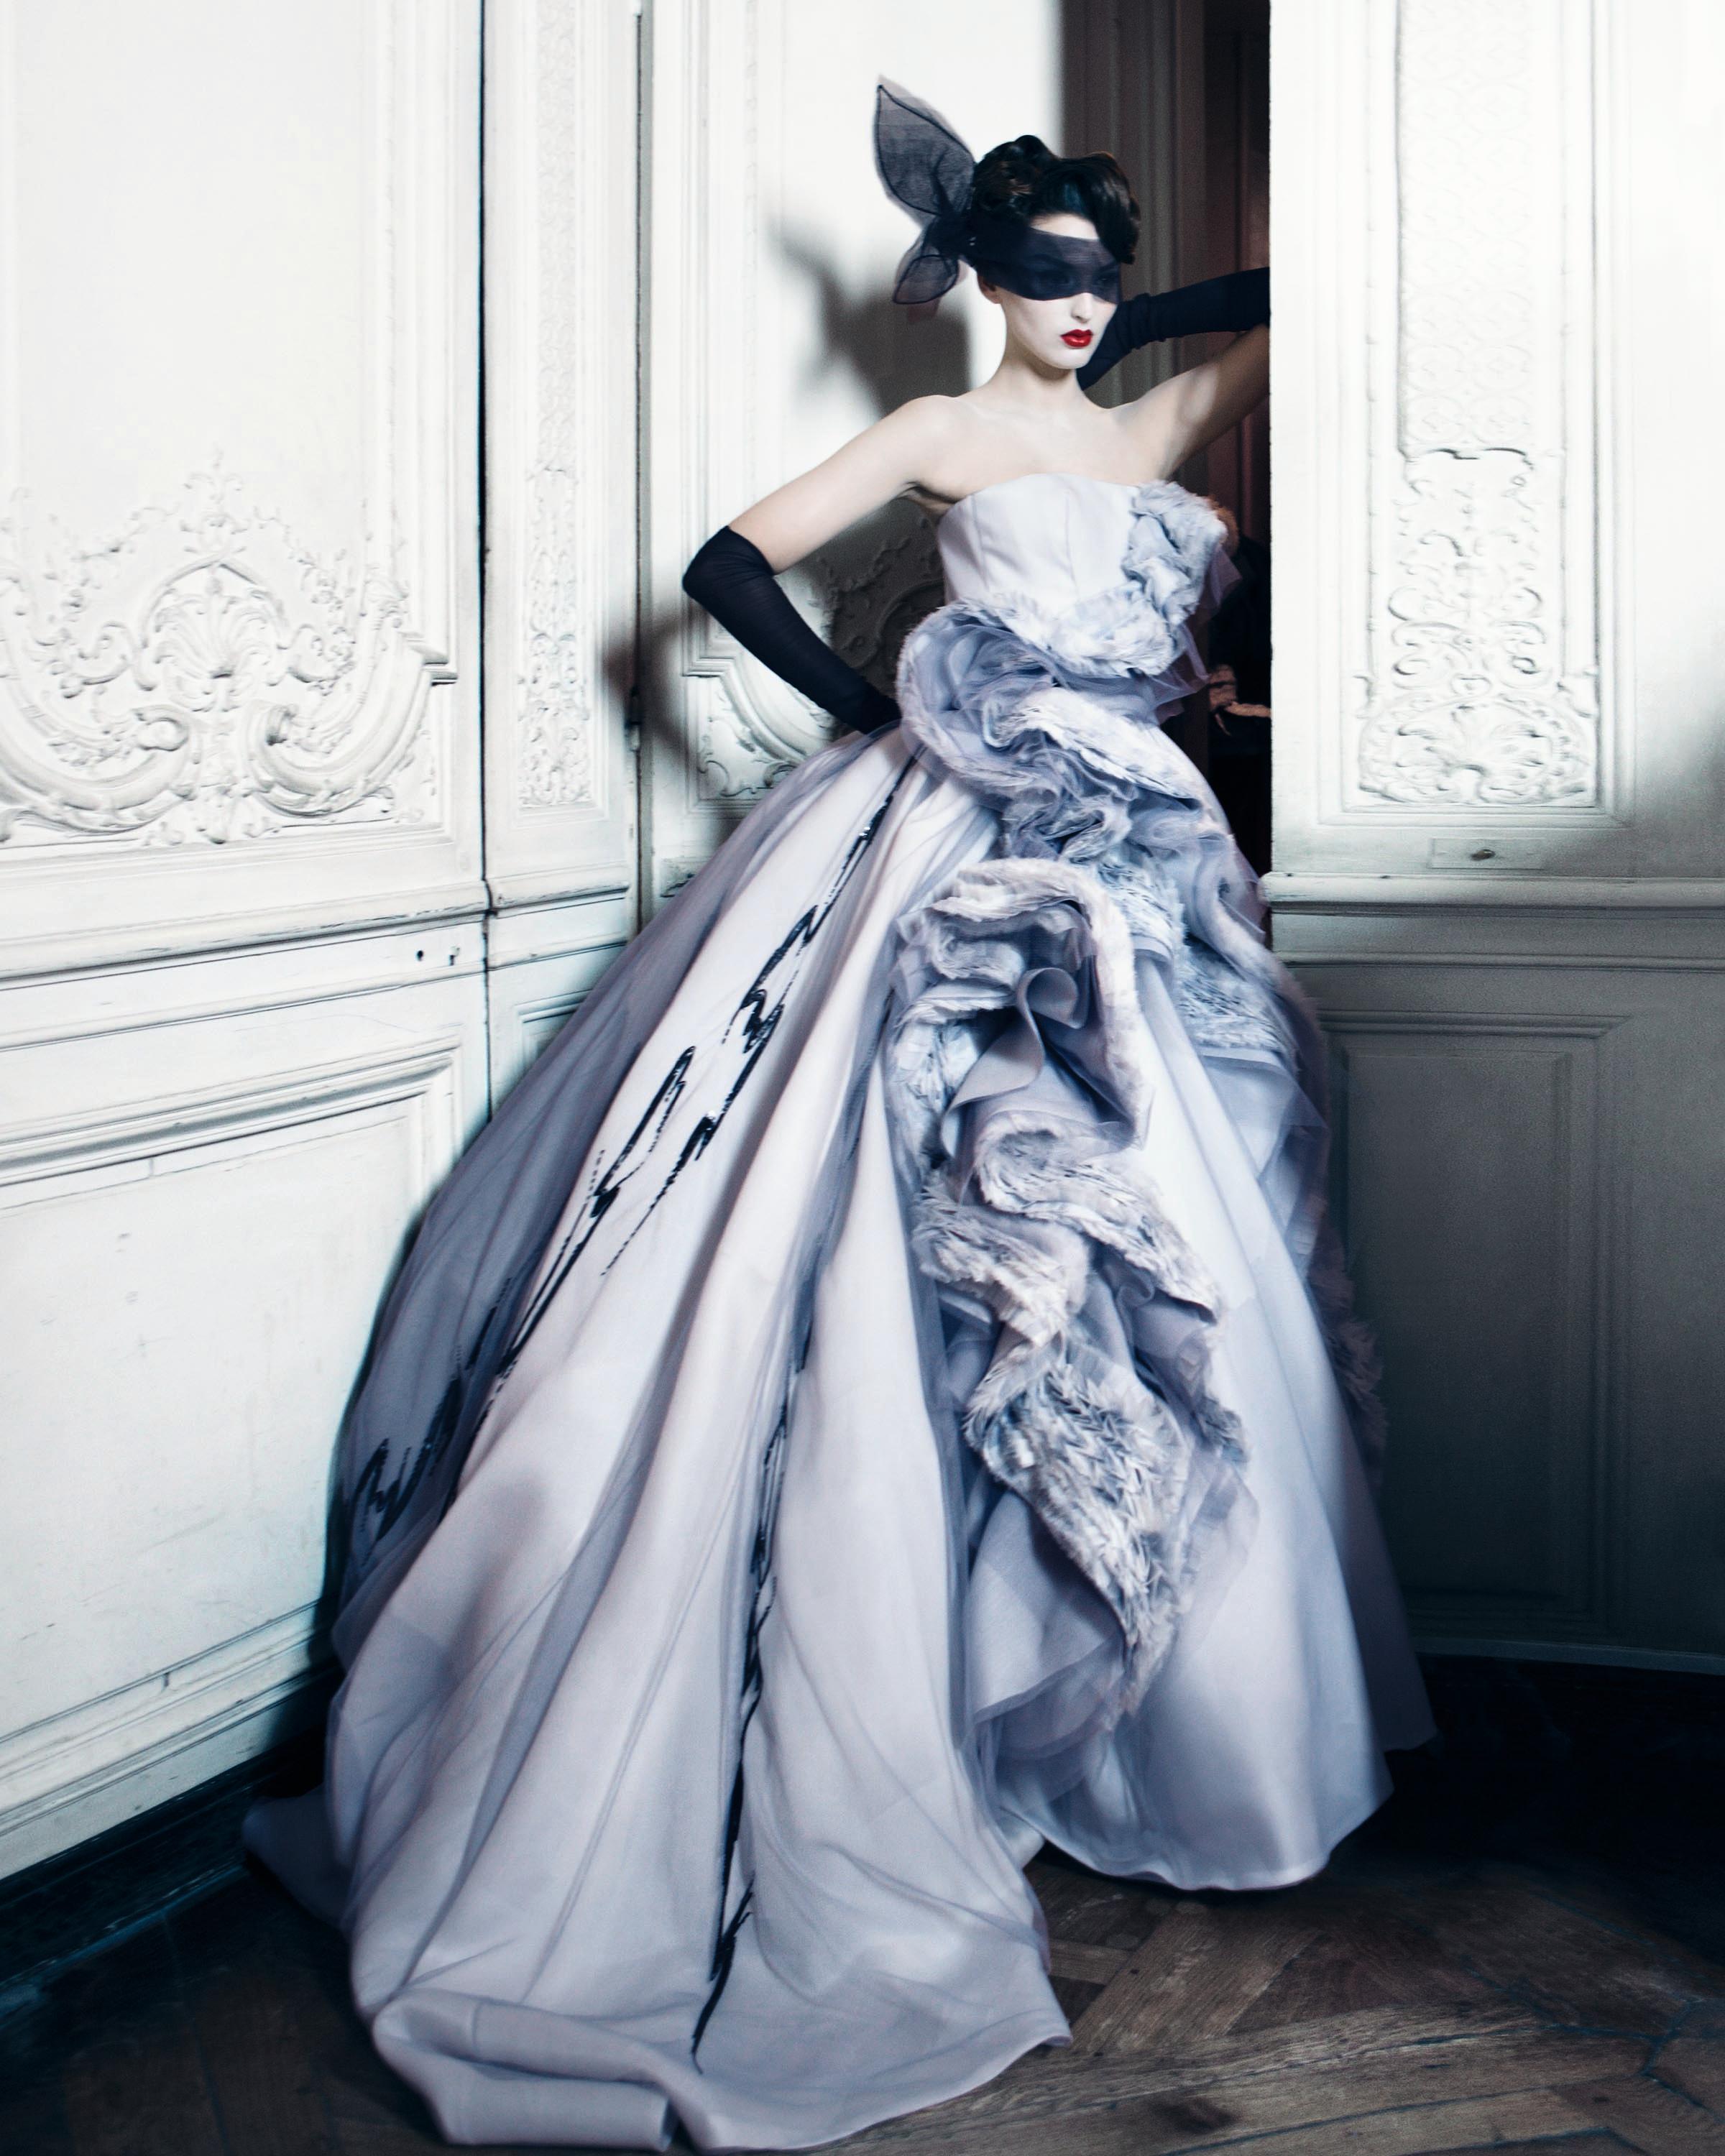 Christian Dior Haute Couture, Spring/Summer, 2011 - Photograph by Patrick Demarchelier